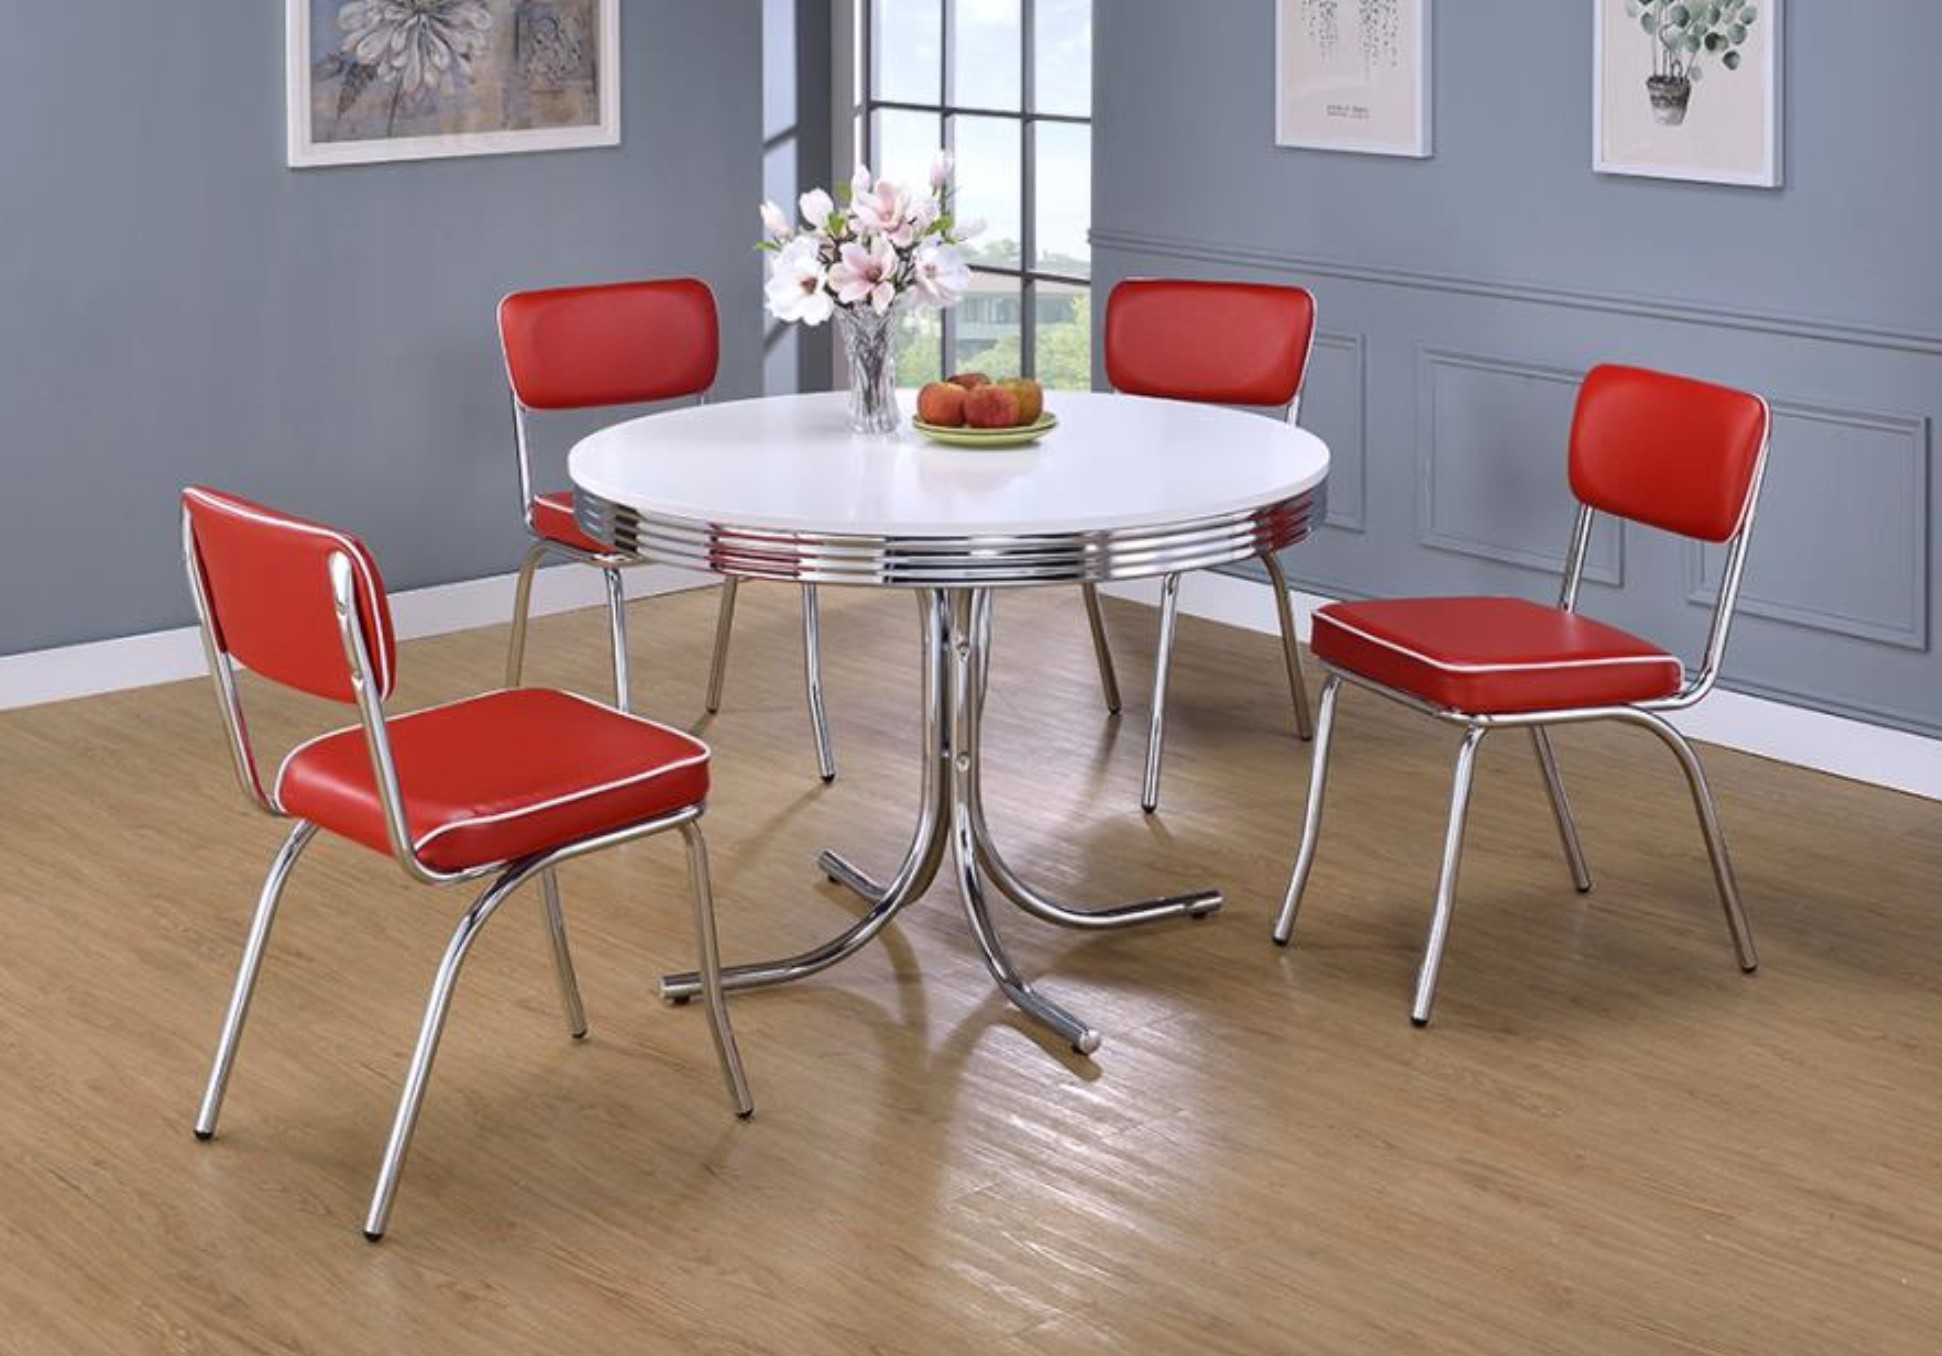 Round Retro Table with Red Chairs